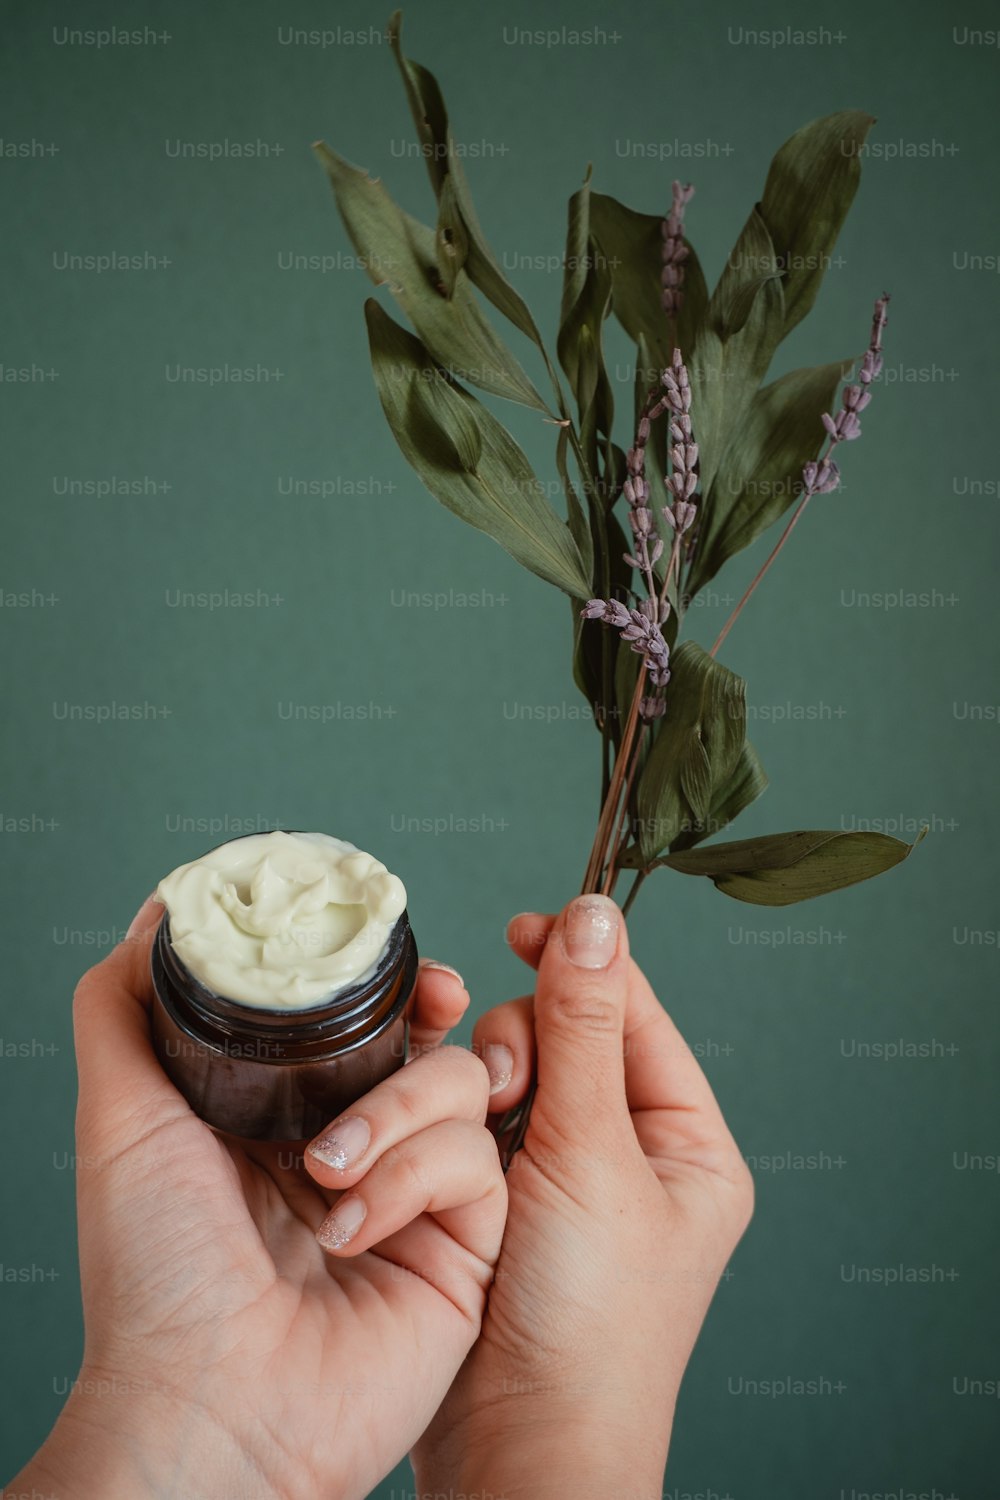 a hand holding a jar of cream next to a plant